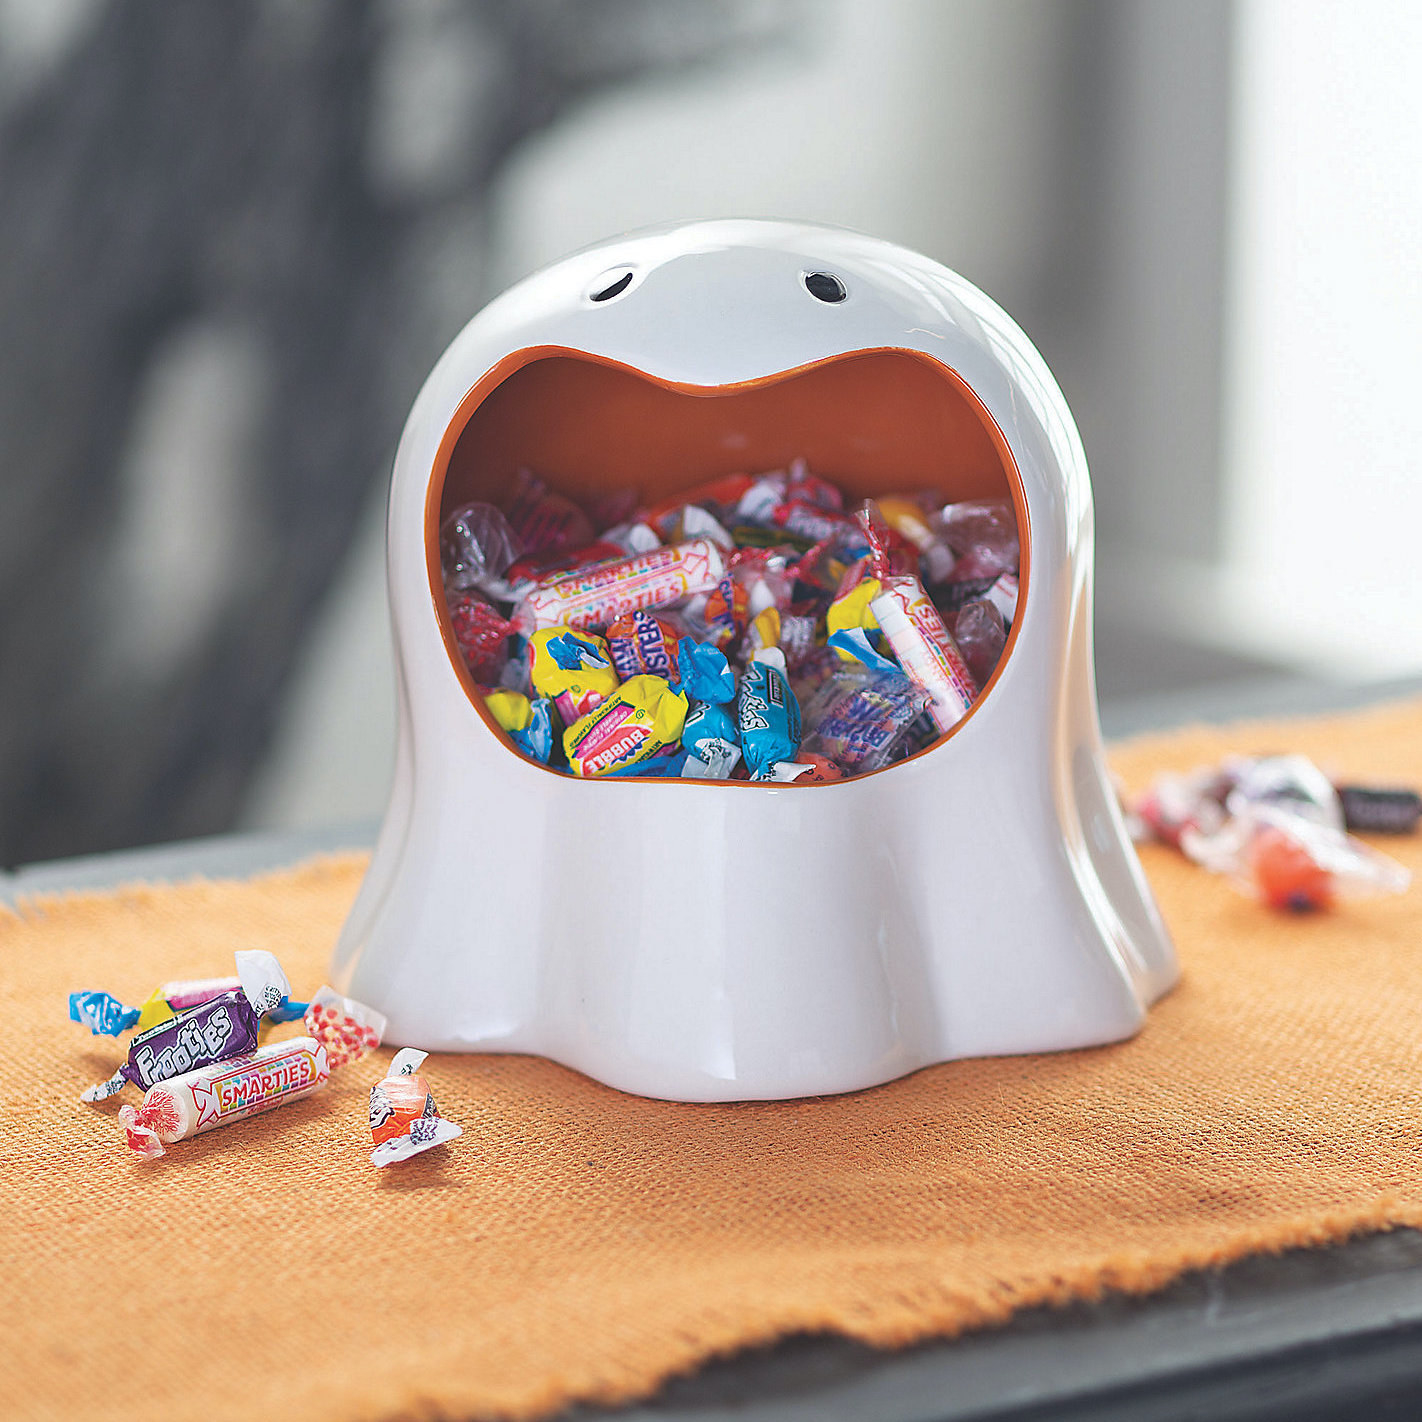 A candy dish in the shape of a ghost holds candy in its mouth